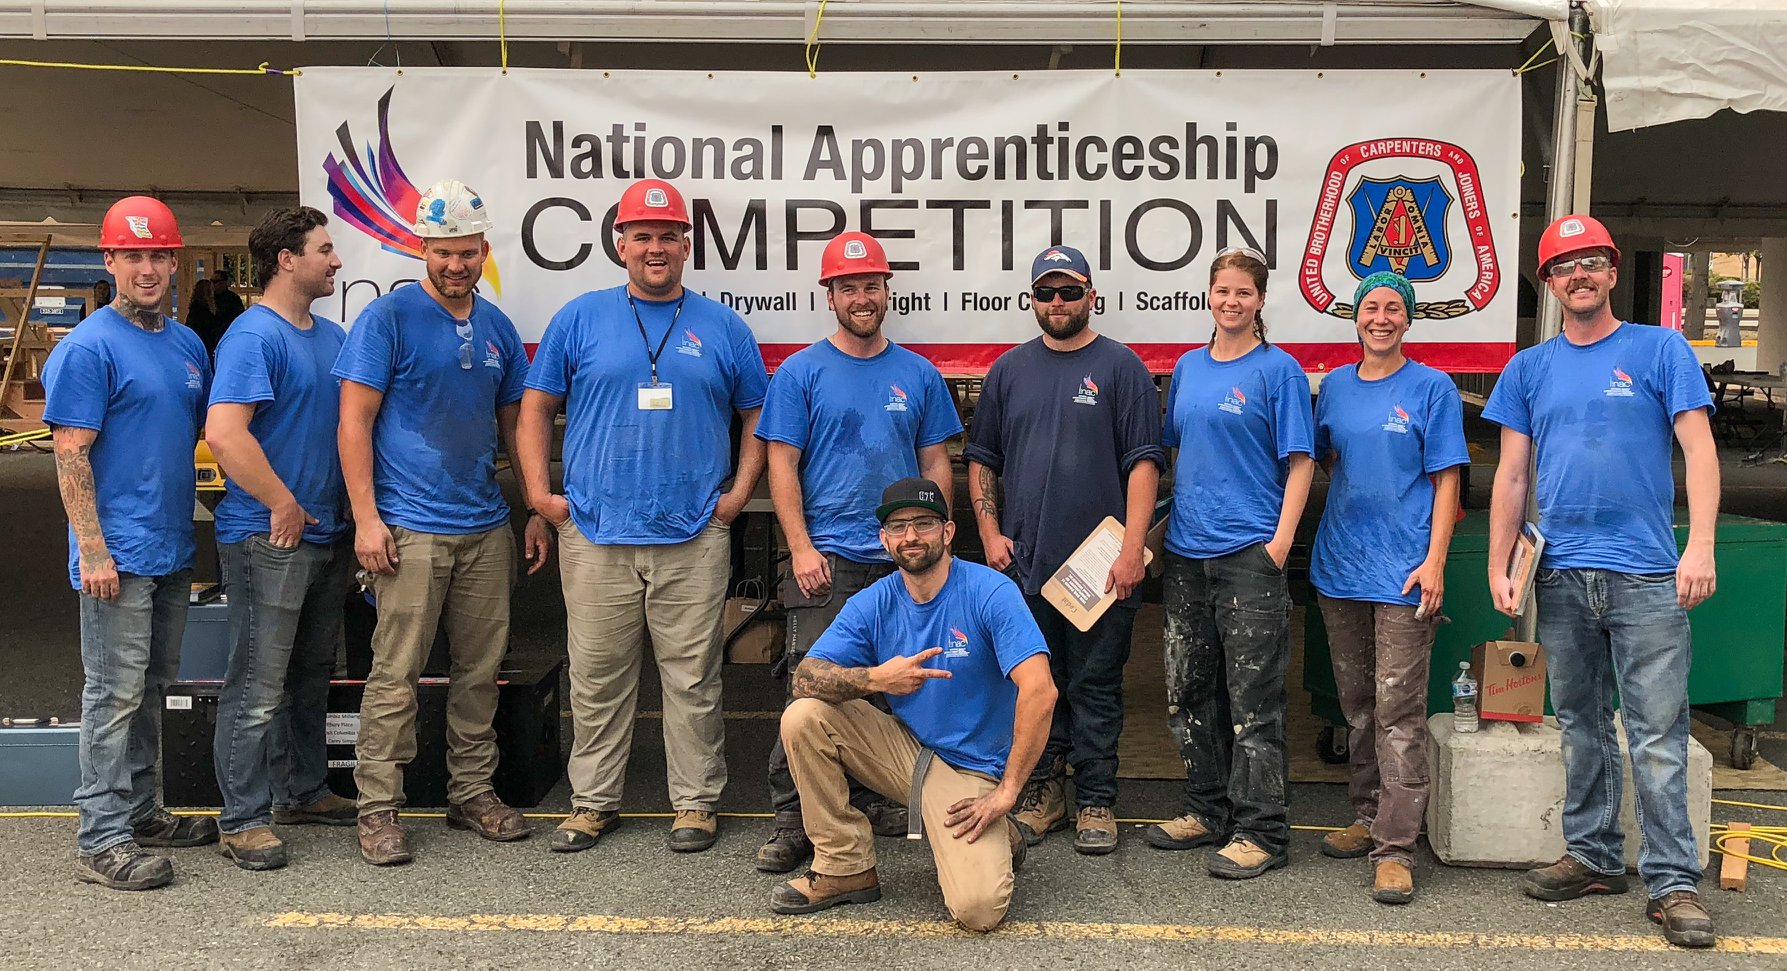 National Apprenticeship Competition 2018